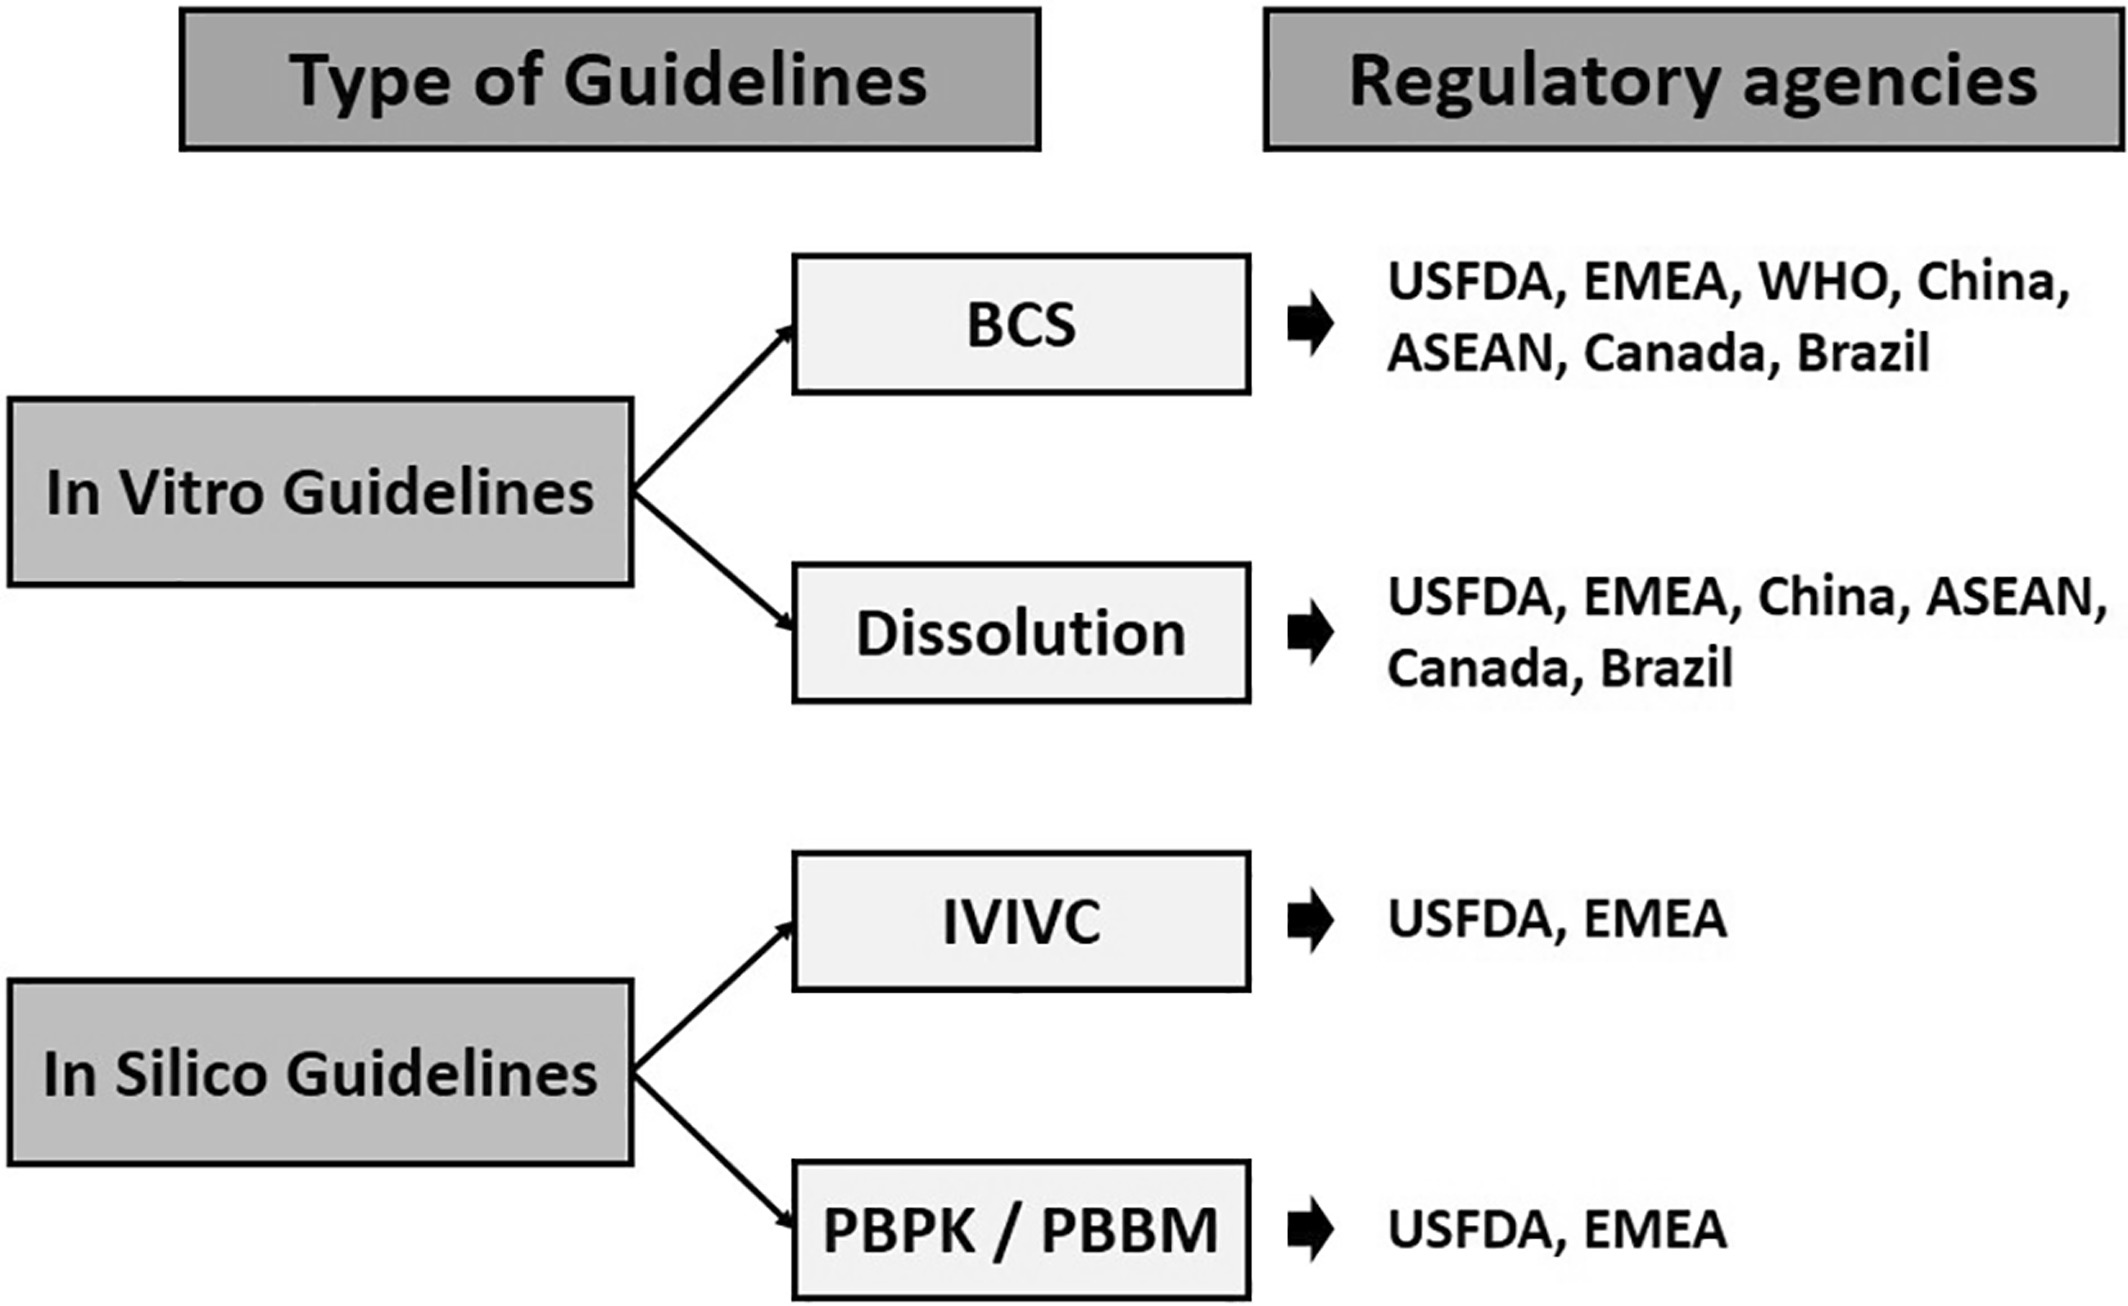 In vitro and In silico biopharmaceutic regulatory guidelines for generic bioequivalence for oral products: Comparison among various regulatory agencies